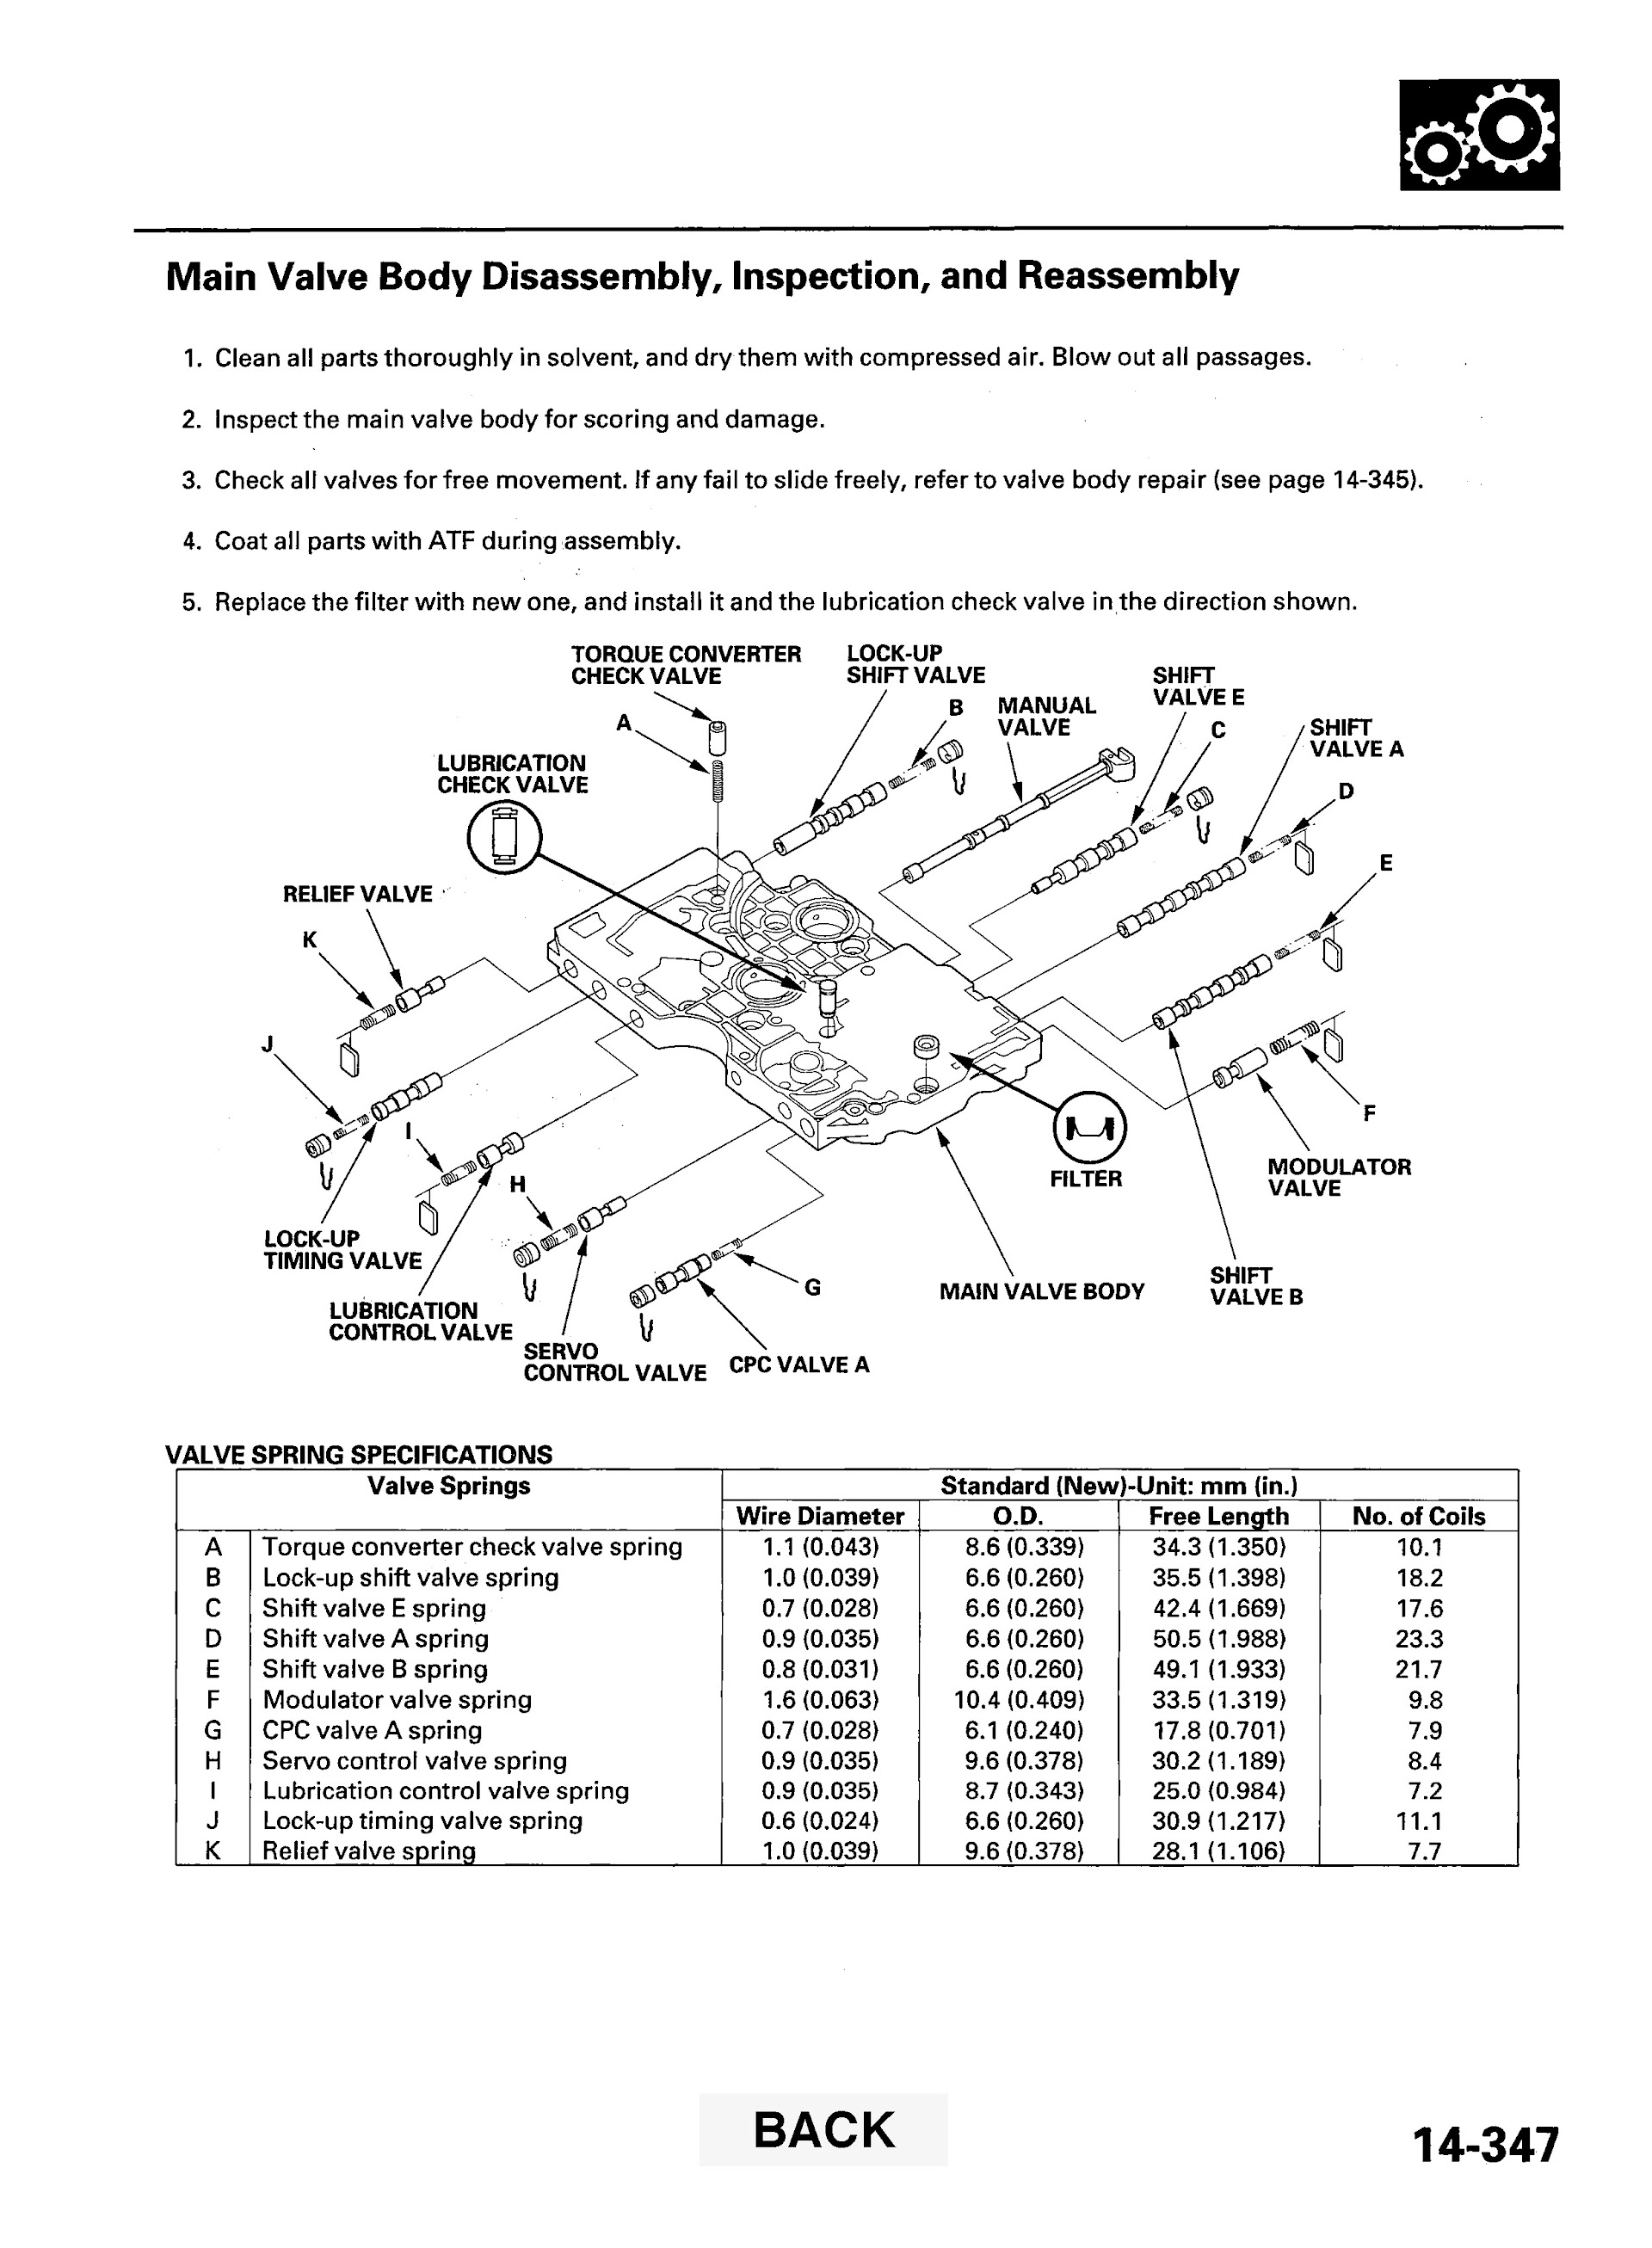 2007 Acura MDX Repair Manual, Main Valve Body Disassembly, Inspection and Reassembly